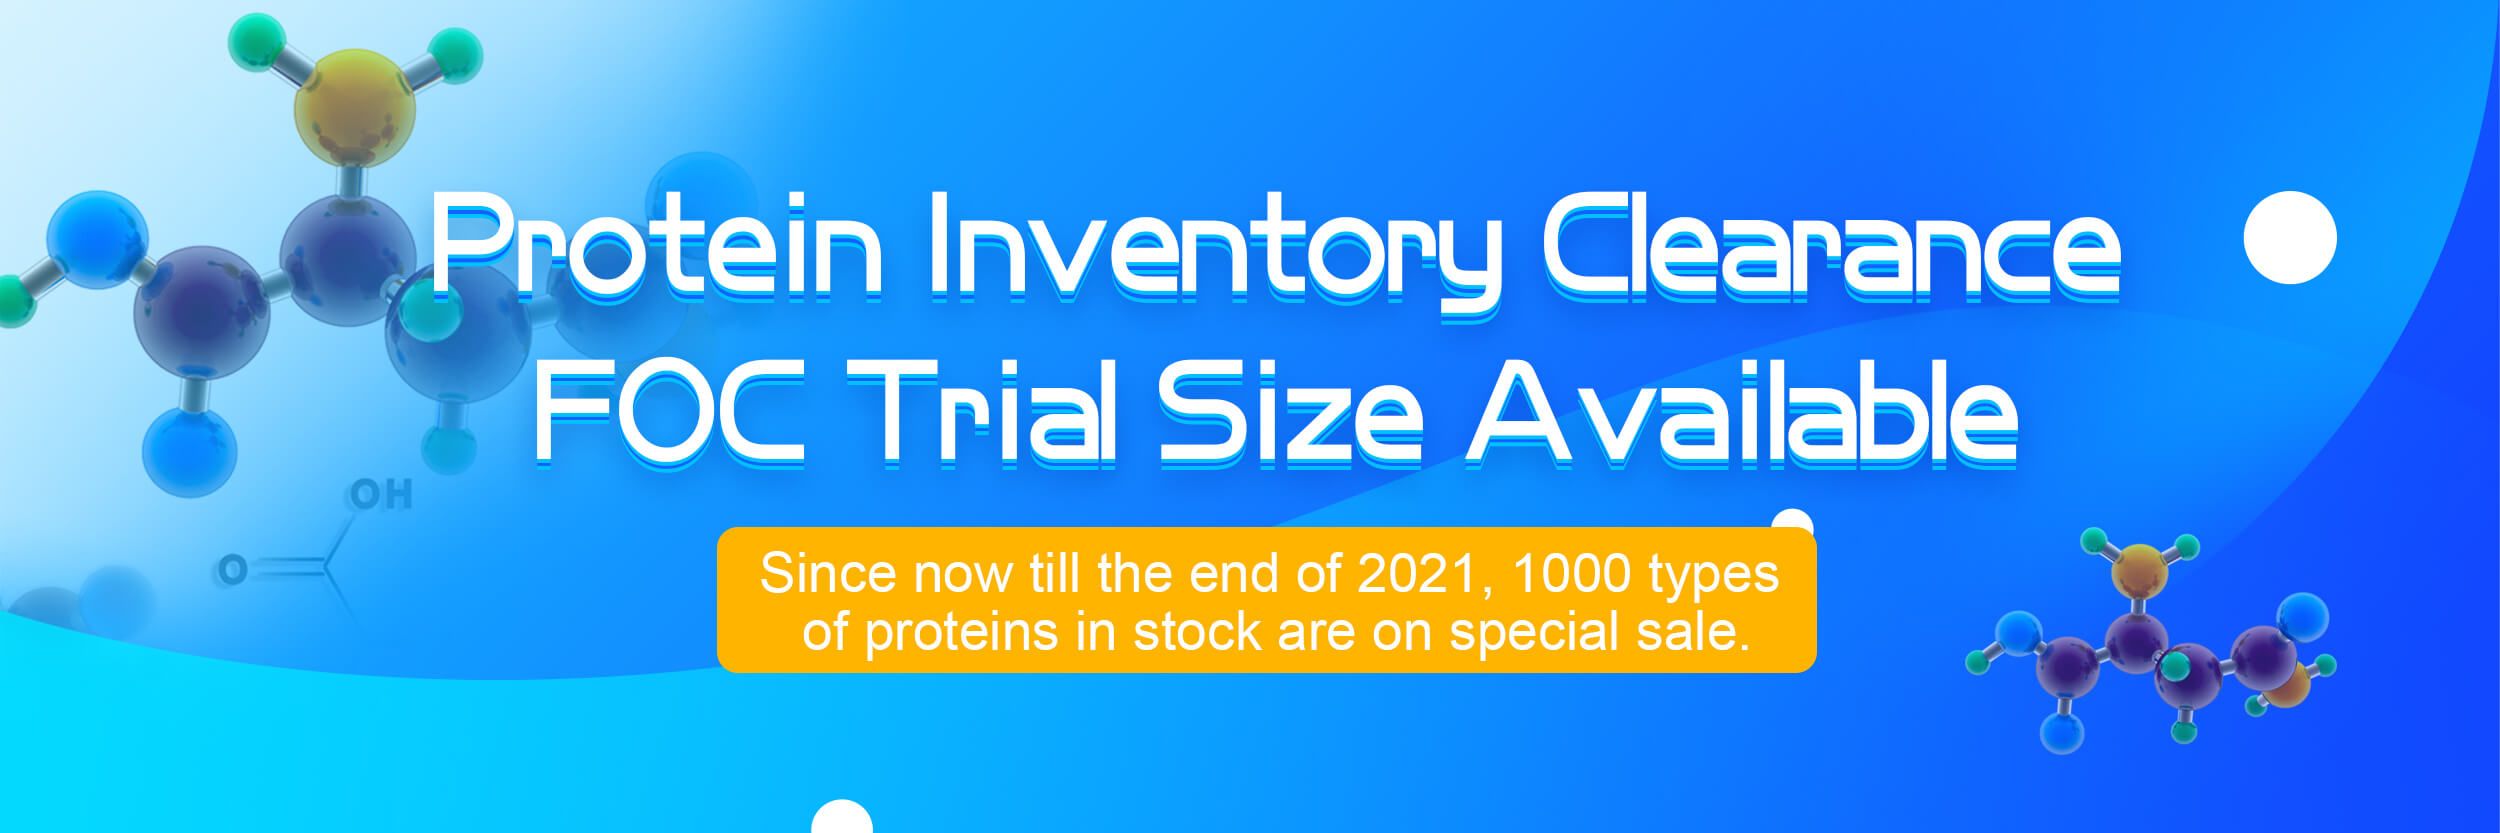 Protein Inventory Clearance